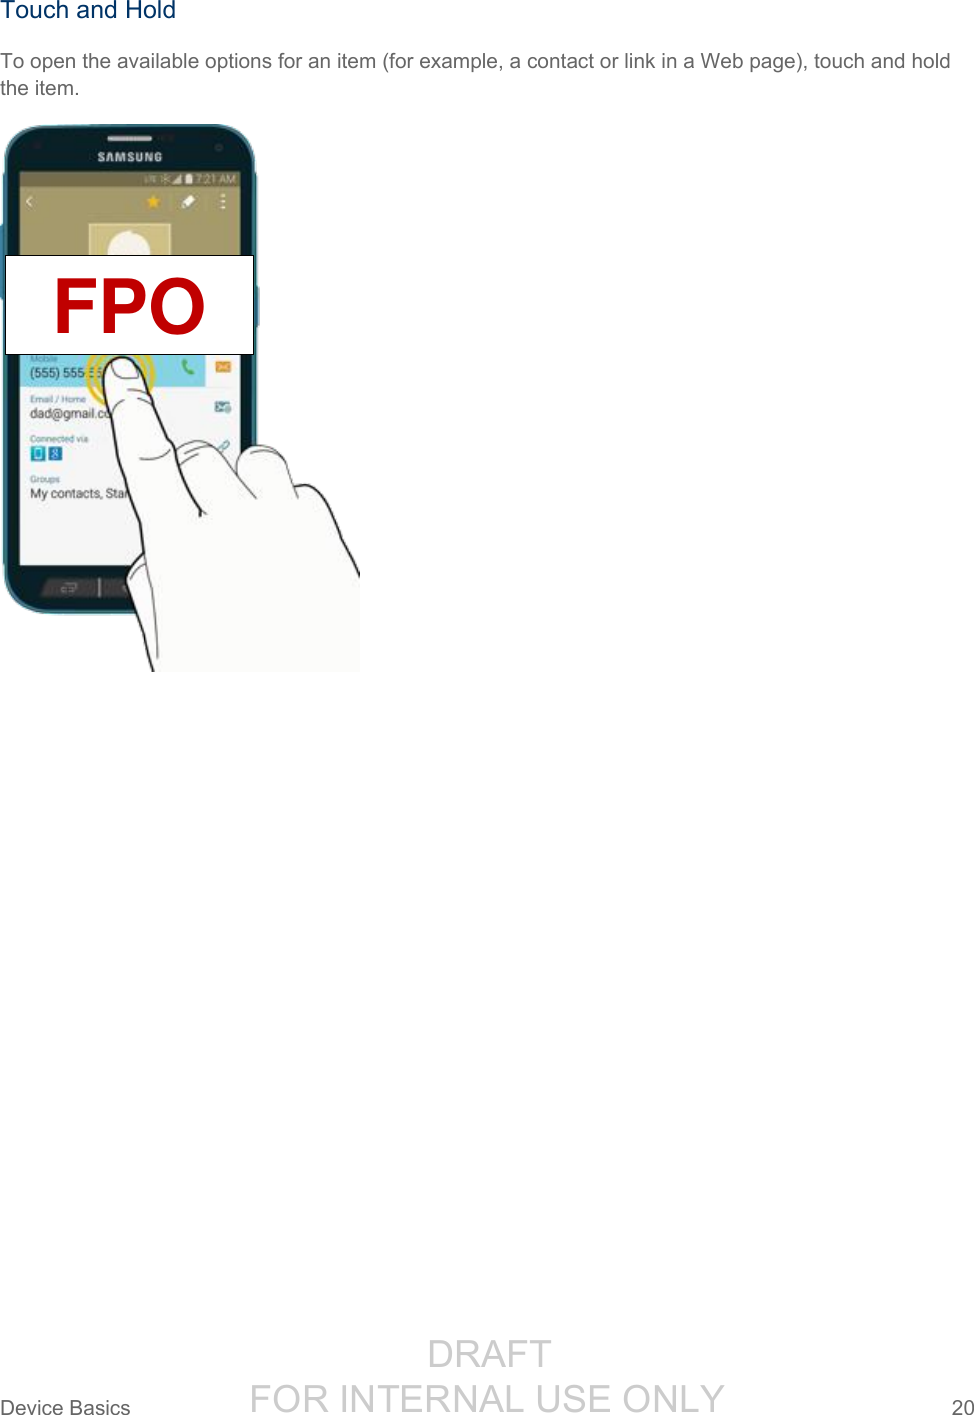                  DRAFT FOR INTERNAL USE ONLYDevice Basics  20   Touch and Hold To open the available options for an item (for example, a contact or link in a Web page), touch and hold the item.  FPO 